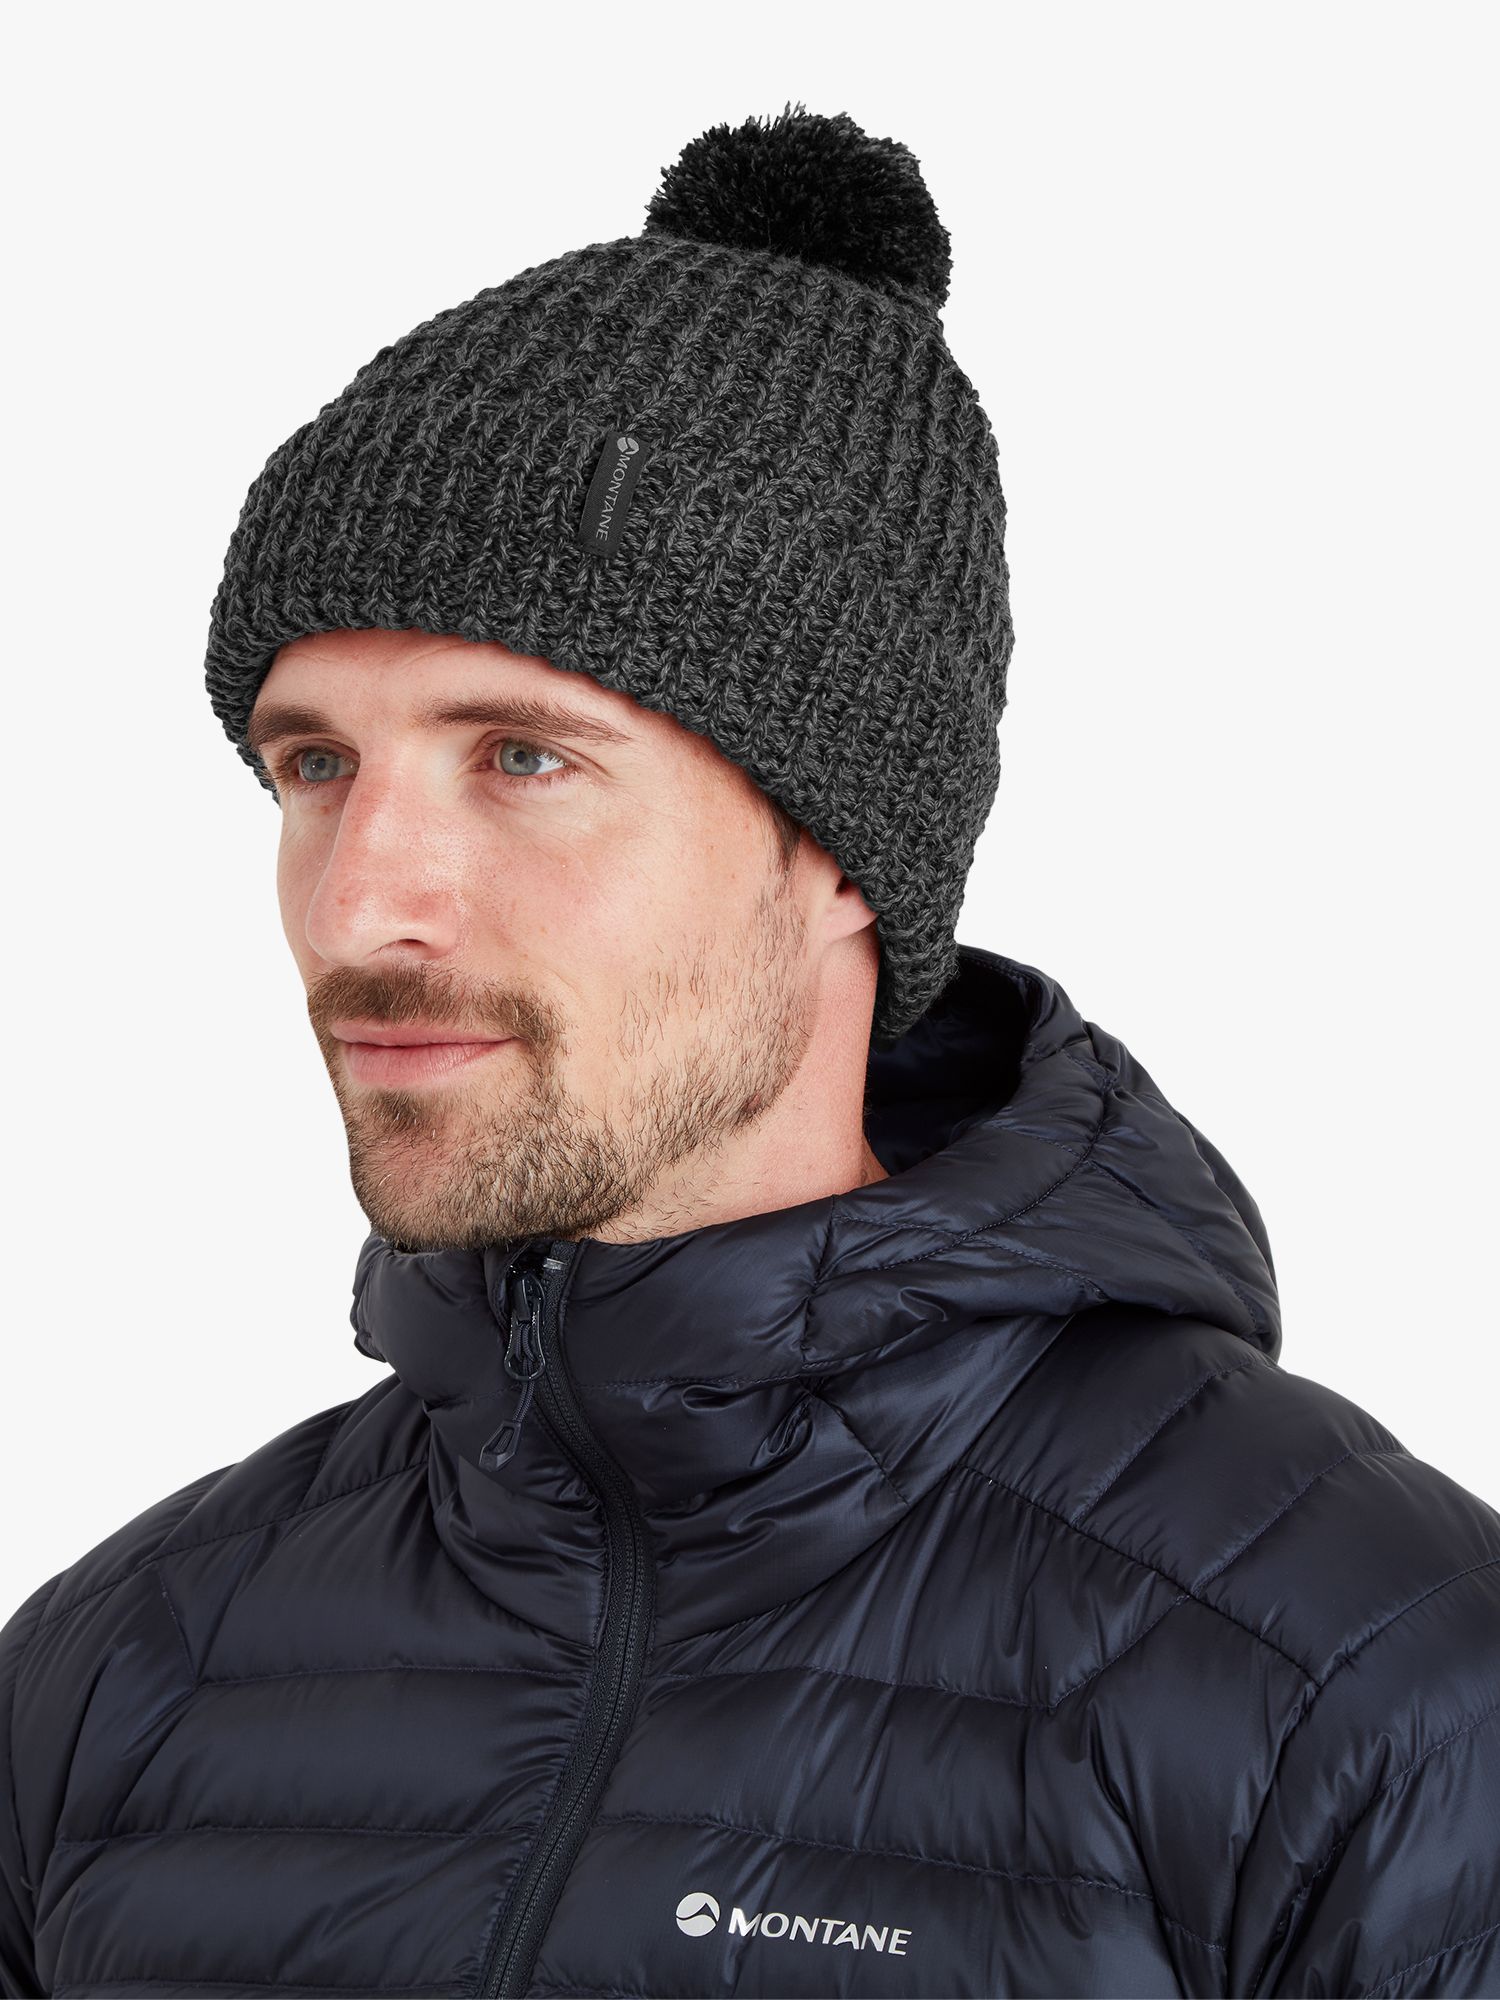 Buy Montane Nev Merino Wool Blend Cable Knit Bobble Hat Online at johnlewis.com